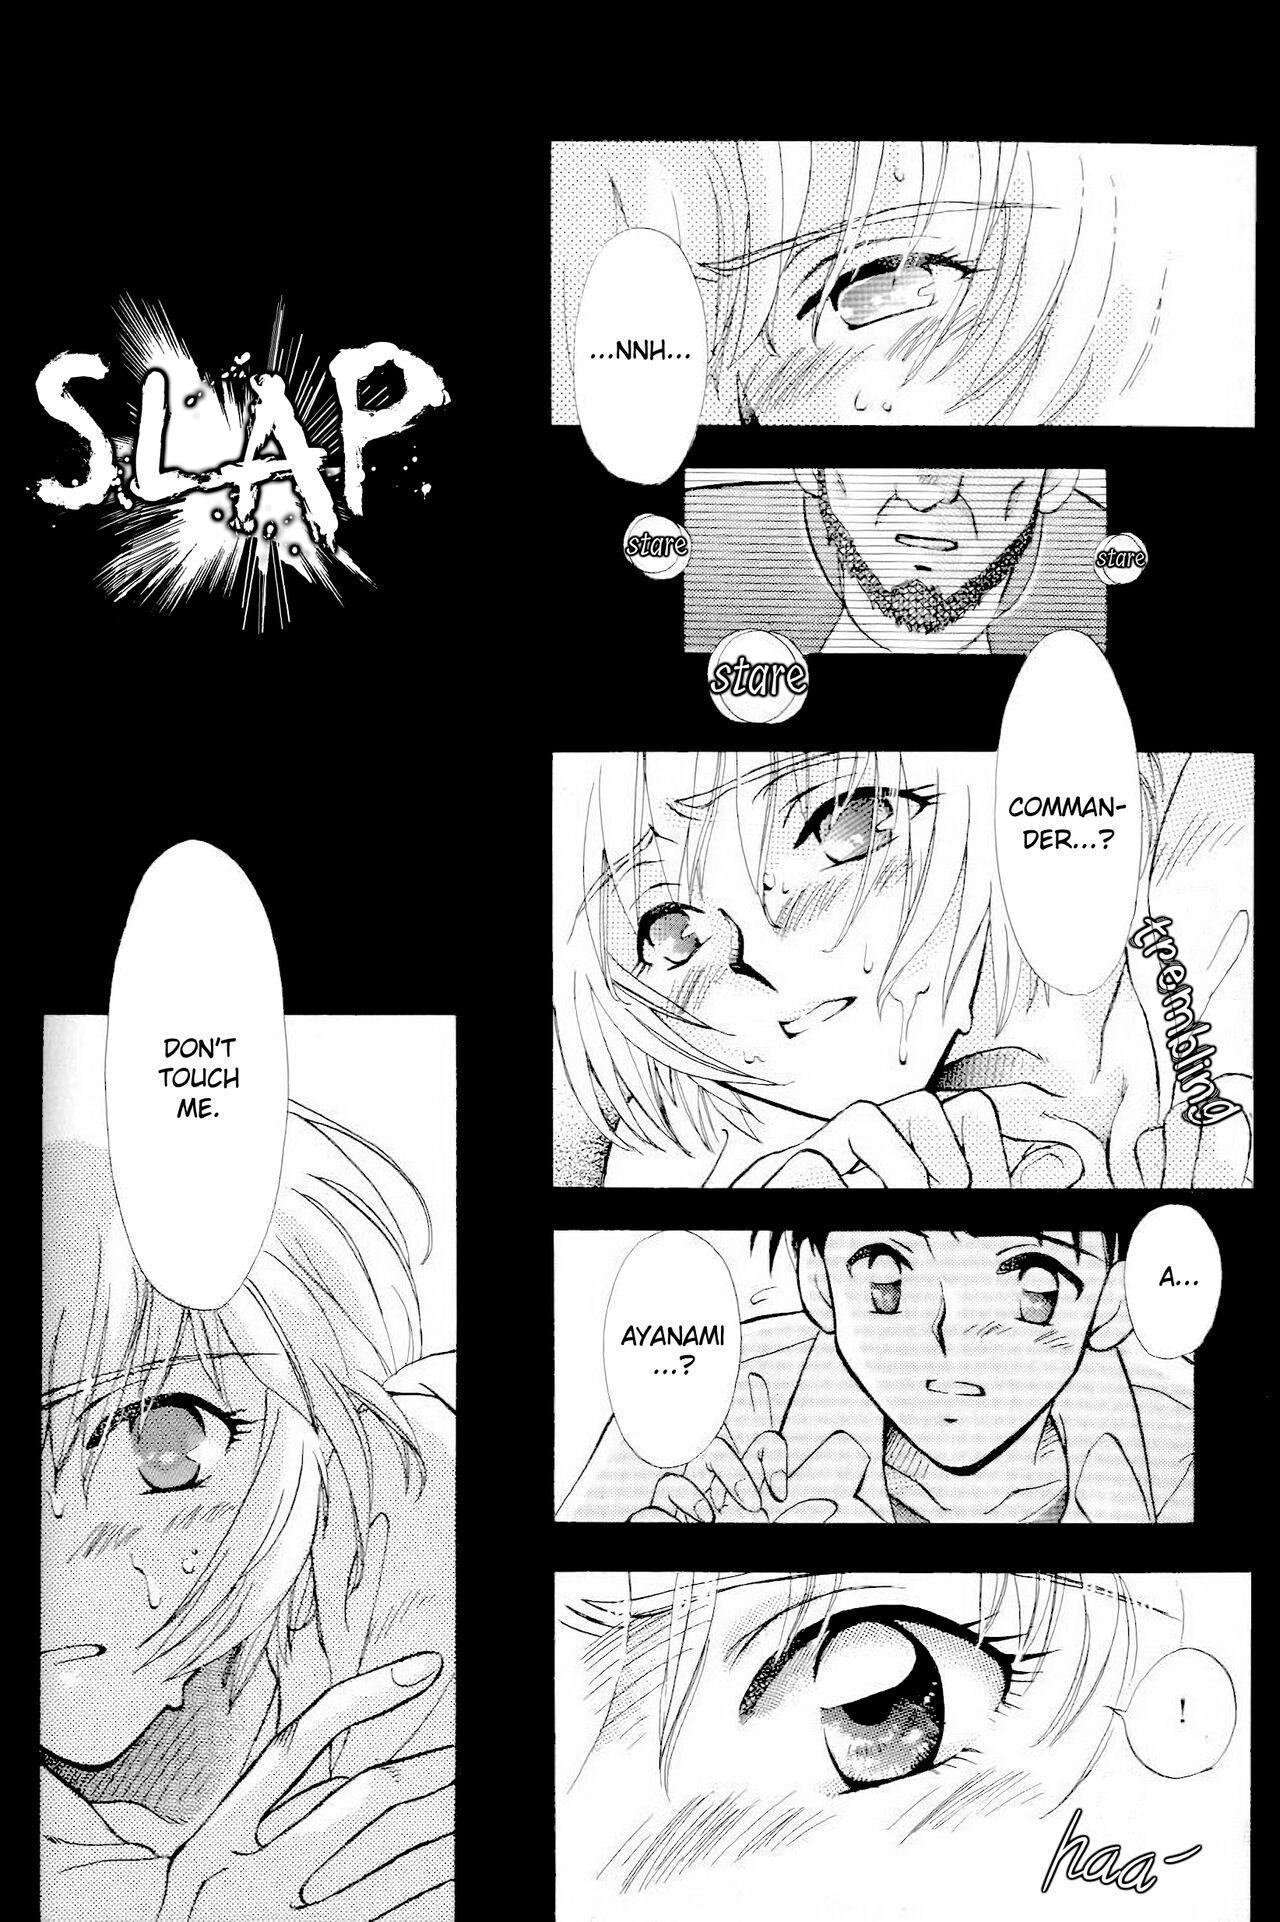 Sexteen How To Fly In The Sky - Please Be True Episode 0:1 - Neon genesis evangelion Dykes - Page 6